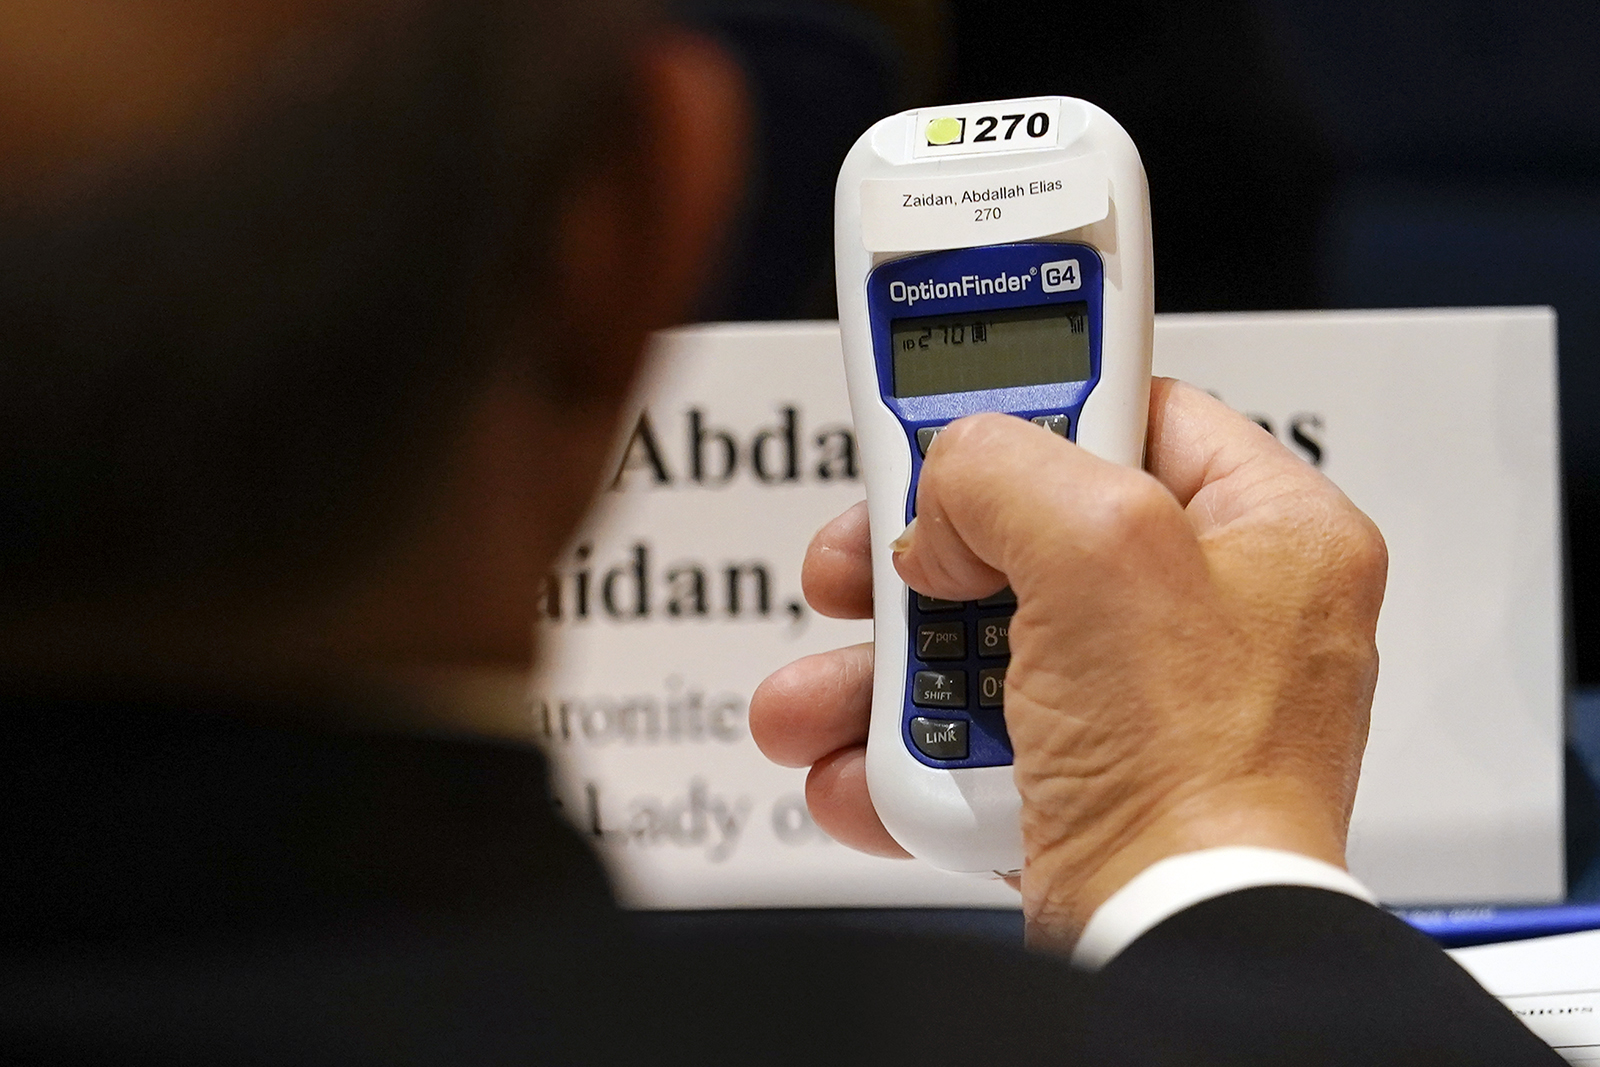 Bishop Abdallah Elias Zaidan, of Our Lady of Lebanon Maronite Catholic Church in Lewisville, Texas, holds his voting device during the Fall General Assembly meeting of the United States Conference of Catholic Bishops, Wednesday, Nov. 17, 2021, in Baltimore. (AP Photo/Julio Cortez)